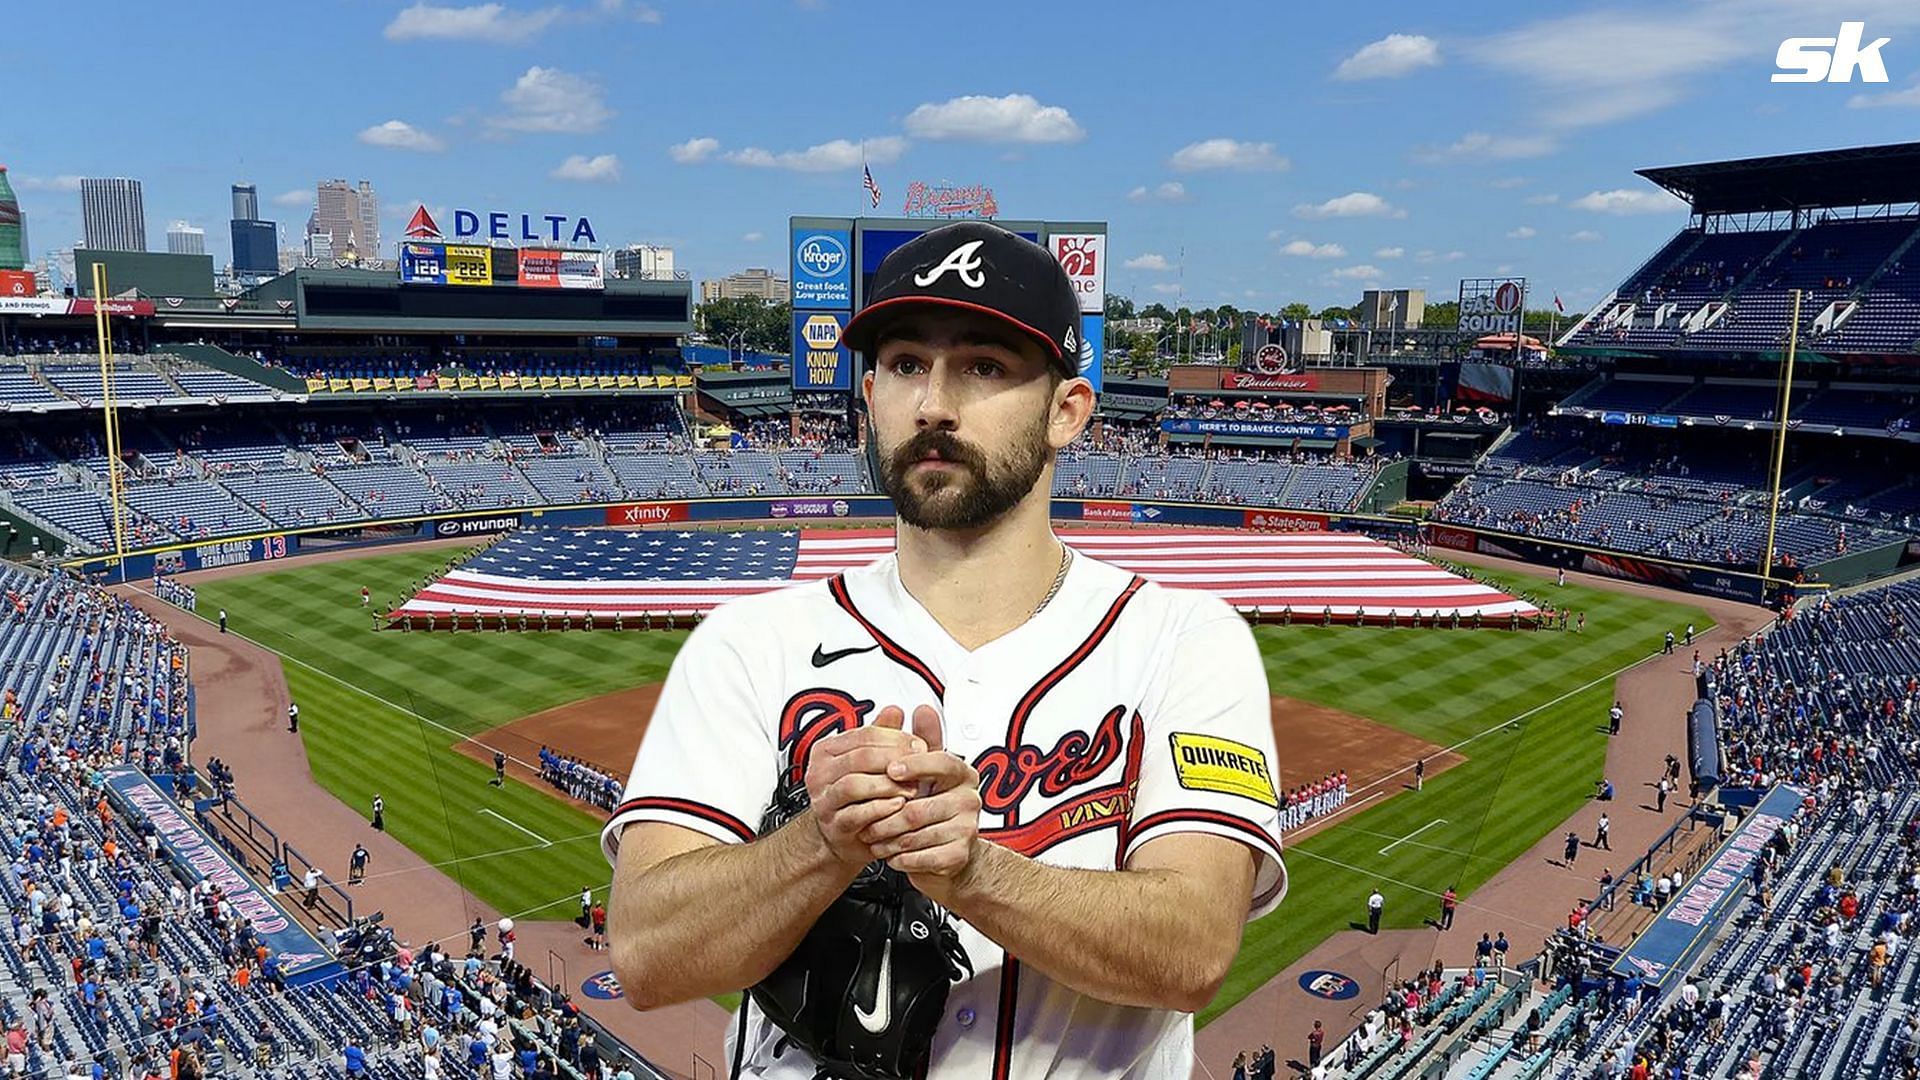 Spencer Strider holds himself and fellow Braves accountable after NLDS exit